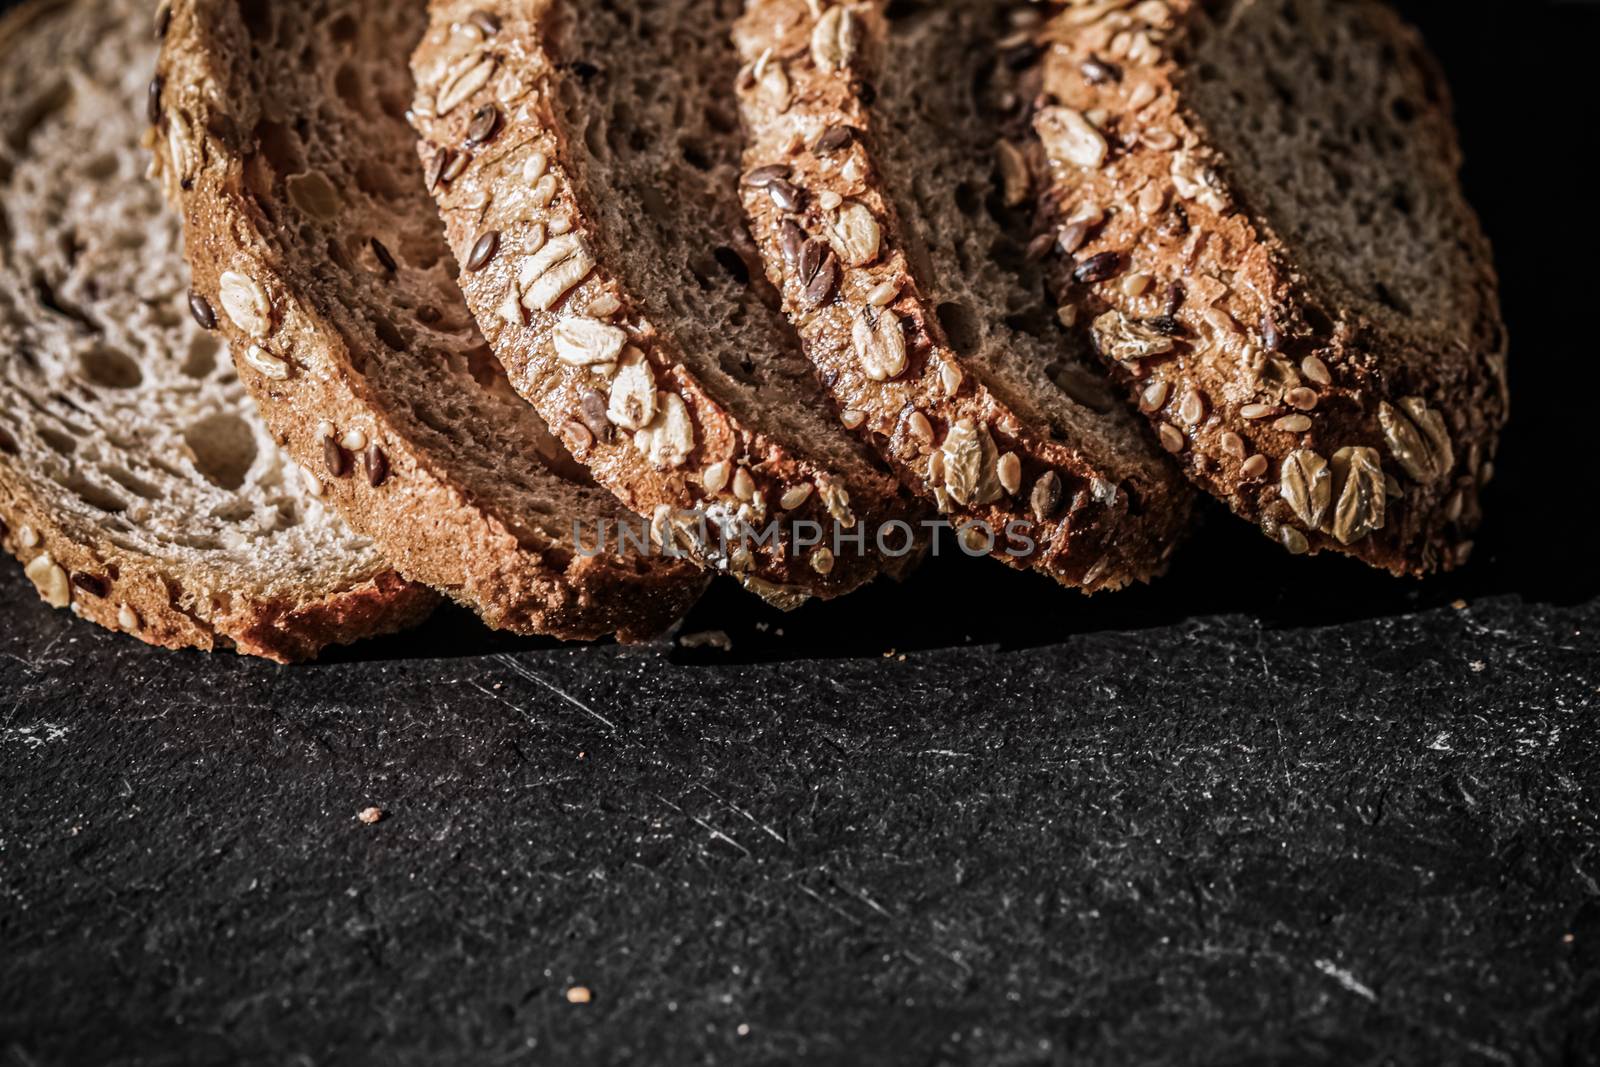 Fresh whole grain seeded bread, organic wheat flour, closeup slice texture as background for food blog or cook book recipes